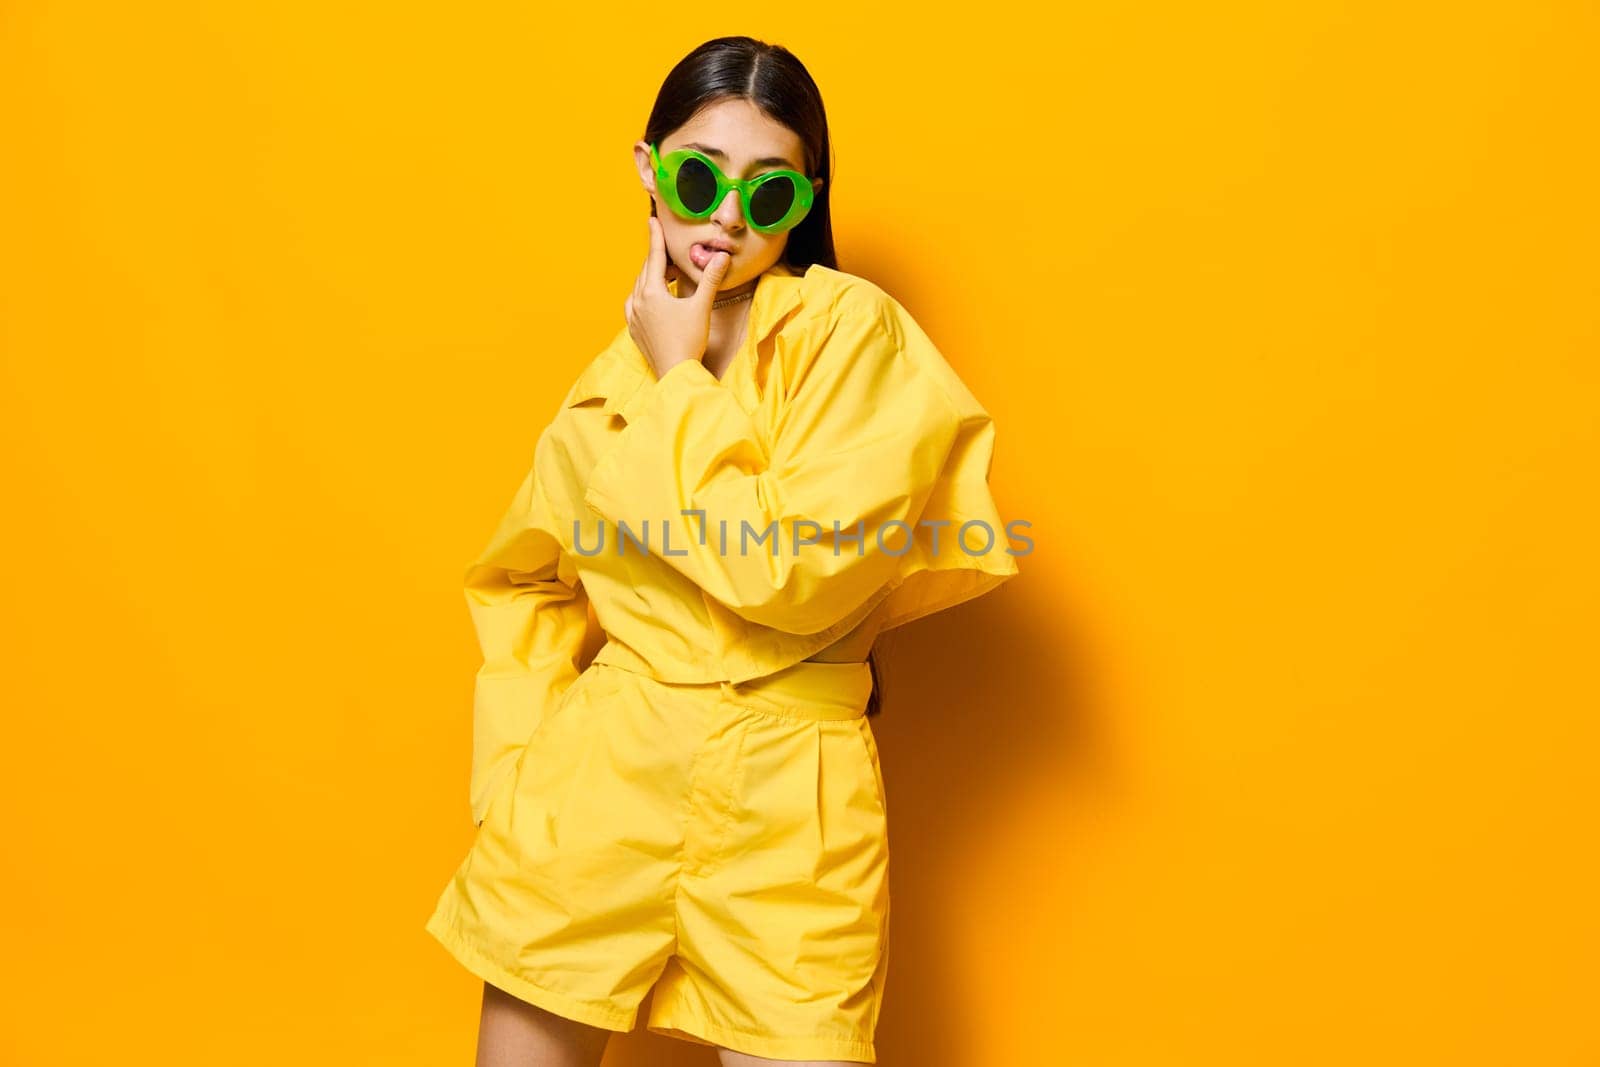 woman cheerful style expression girl hairstyle attractive lady smile happiness sunglasses gesture trendy brunette beautiful lifestyle young fun yellow fashion creative